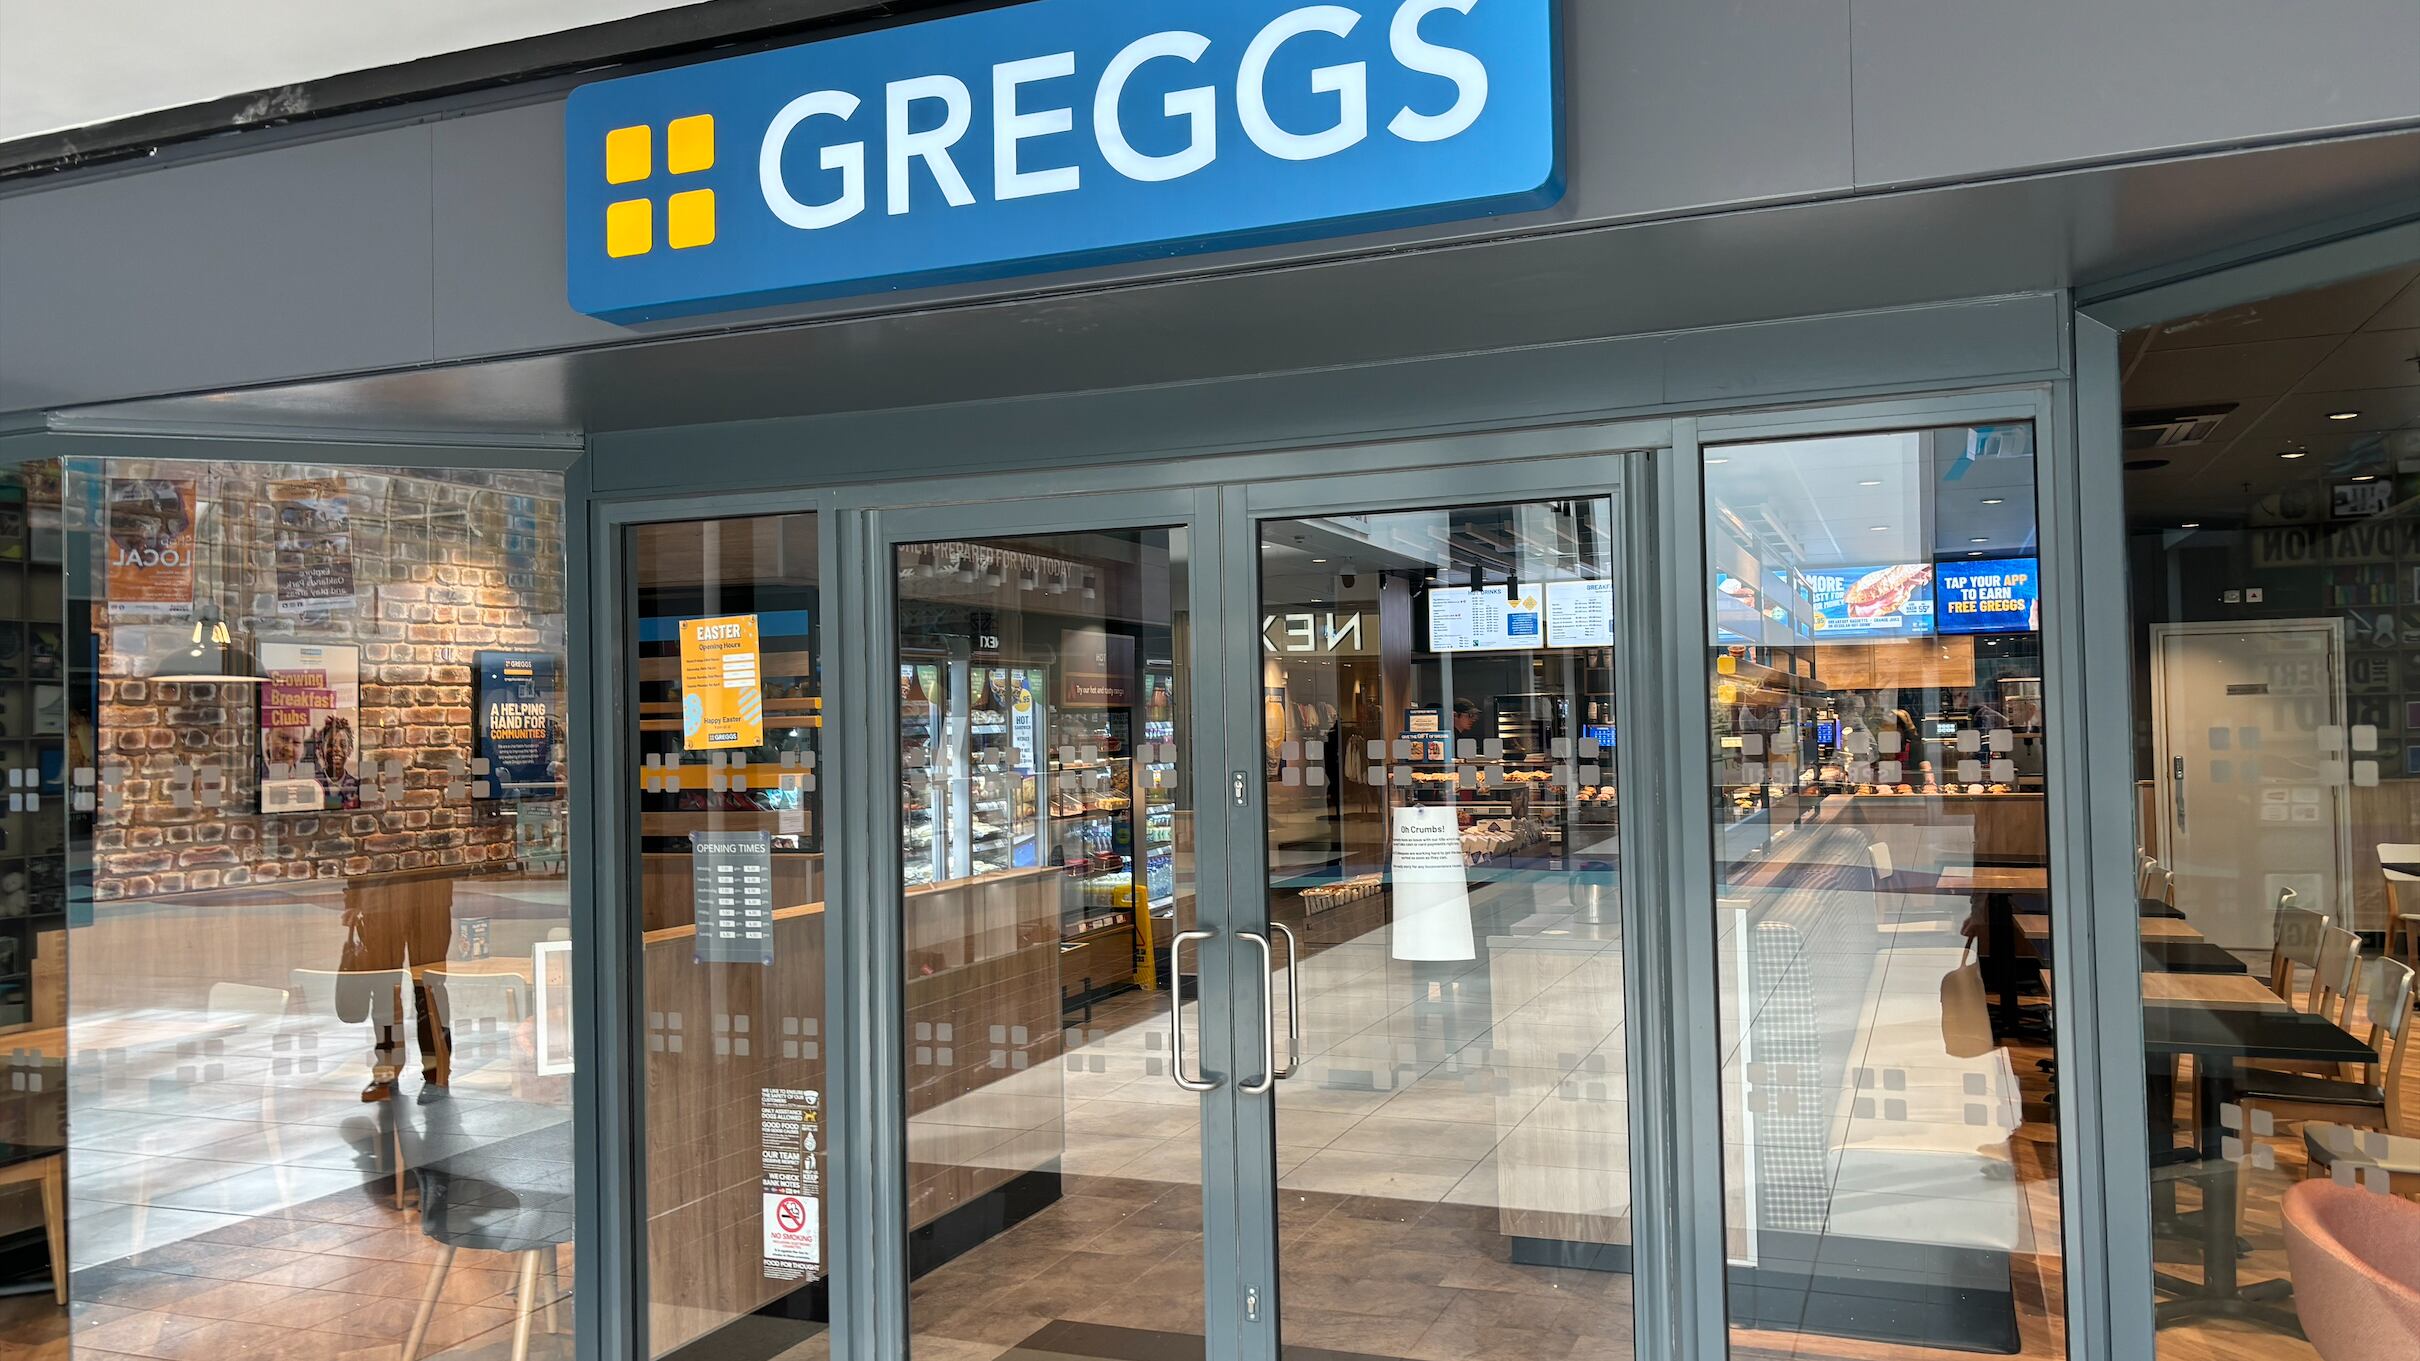 A Greggs shop in Chelmsford, Essex. Bakery chain Greggs has cheered a strong start to the year after notching up a sales hike as its expansion continues across Britain’s high streets